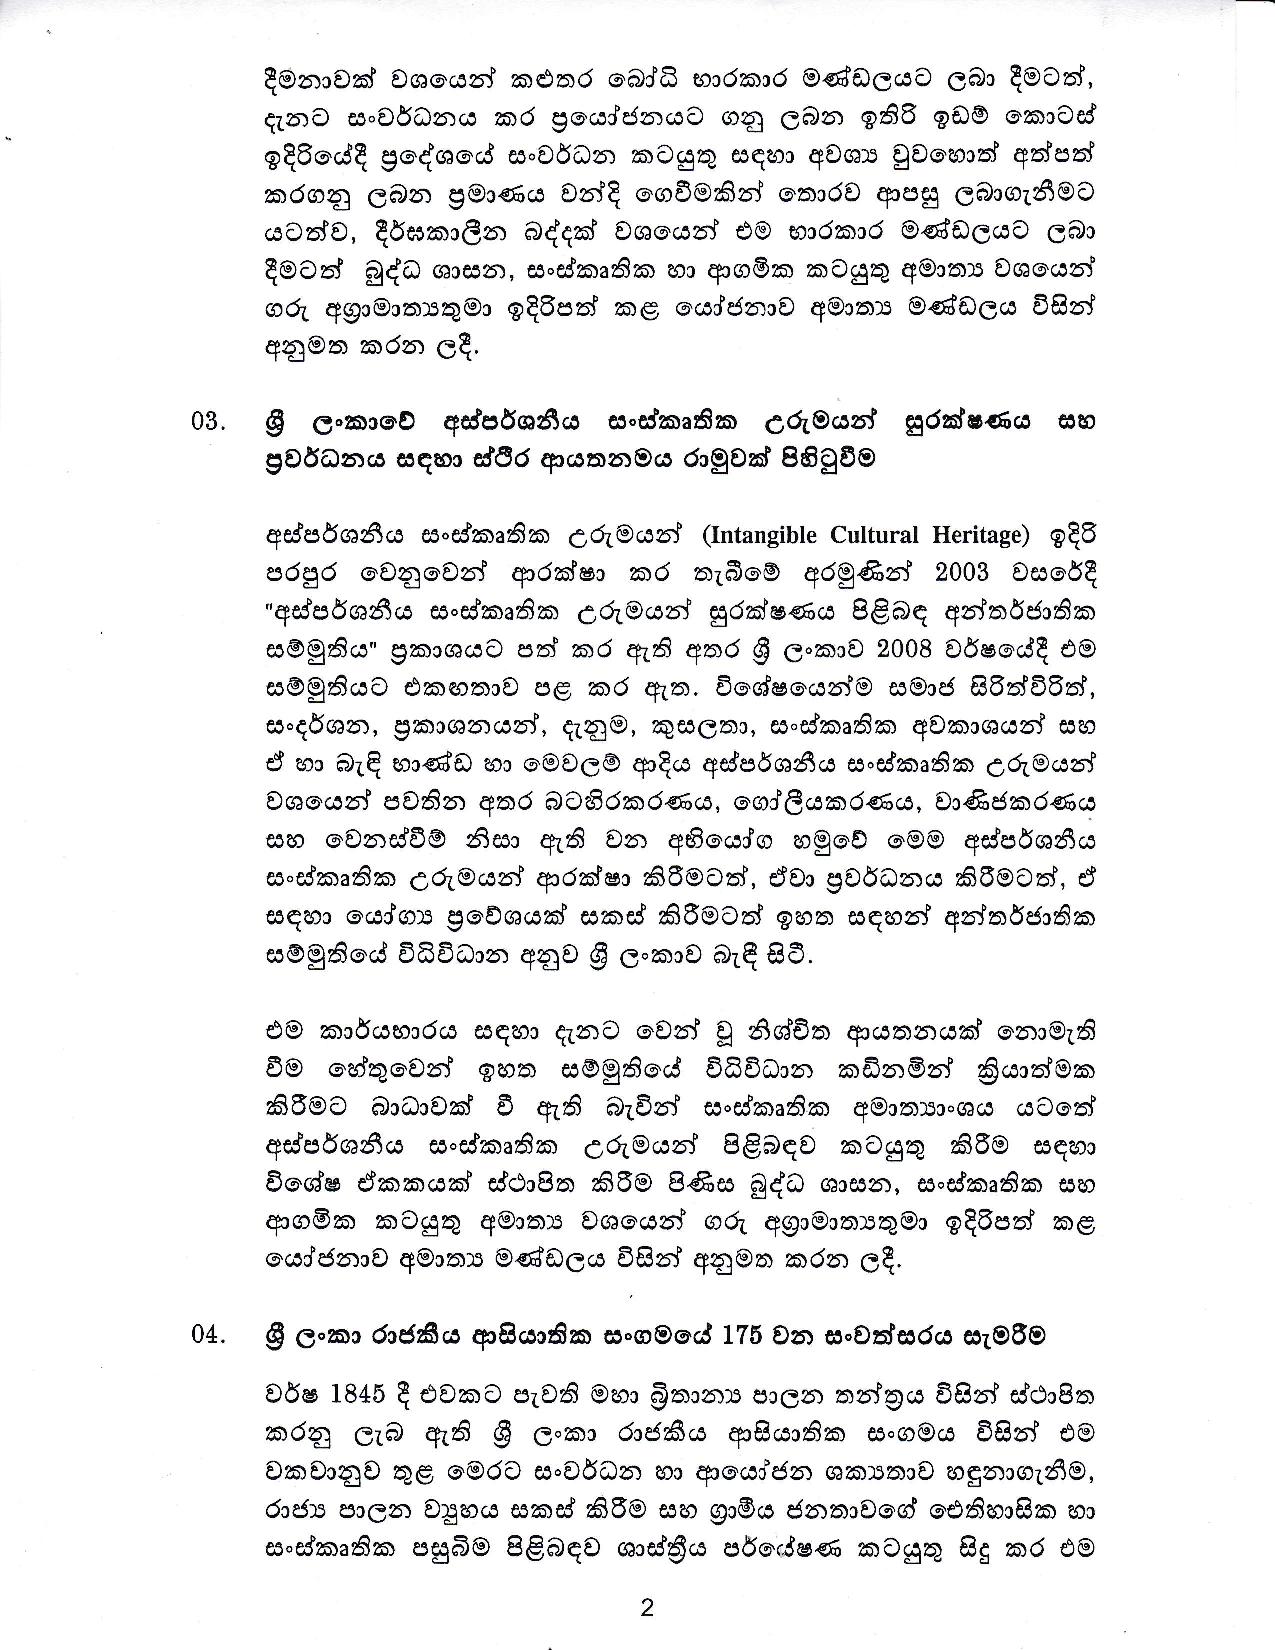 Cabinet Decision on 04.03.2020 page 002